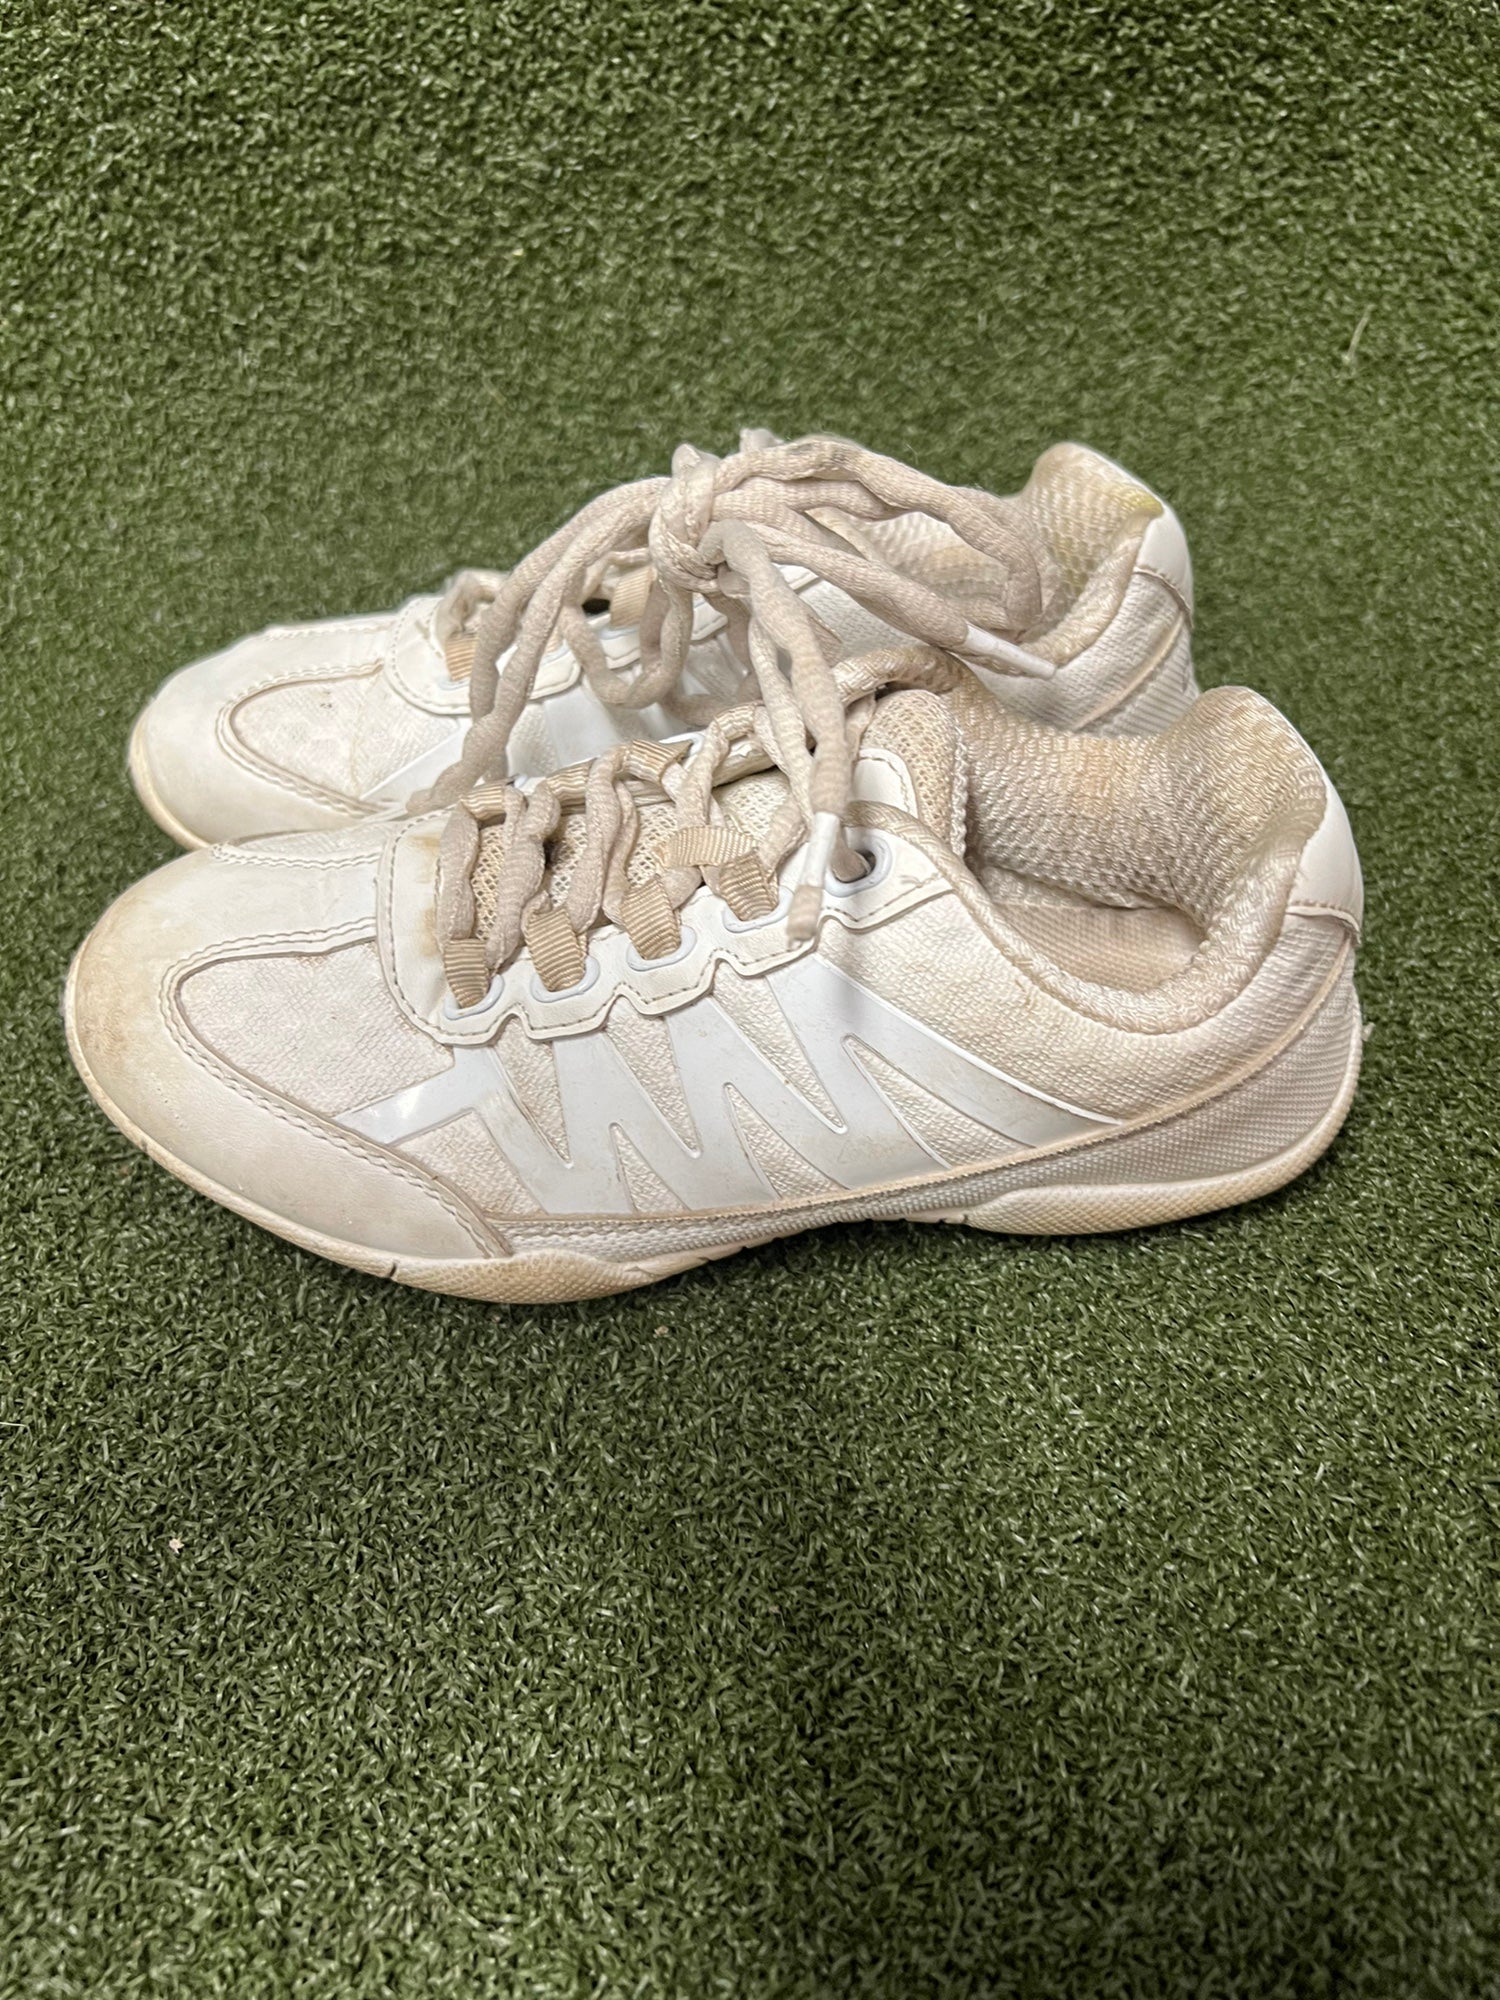 Chasse Cheer Shoes for Sale in Bennington, NE - OfferUp